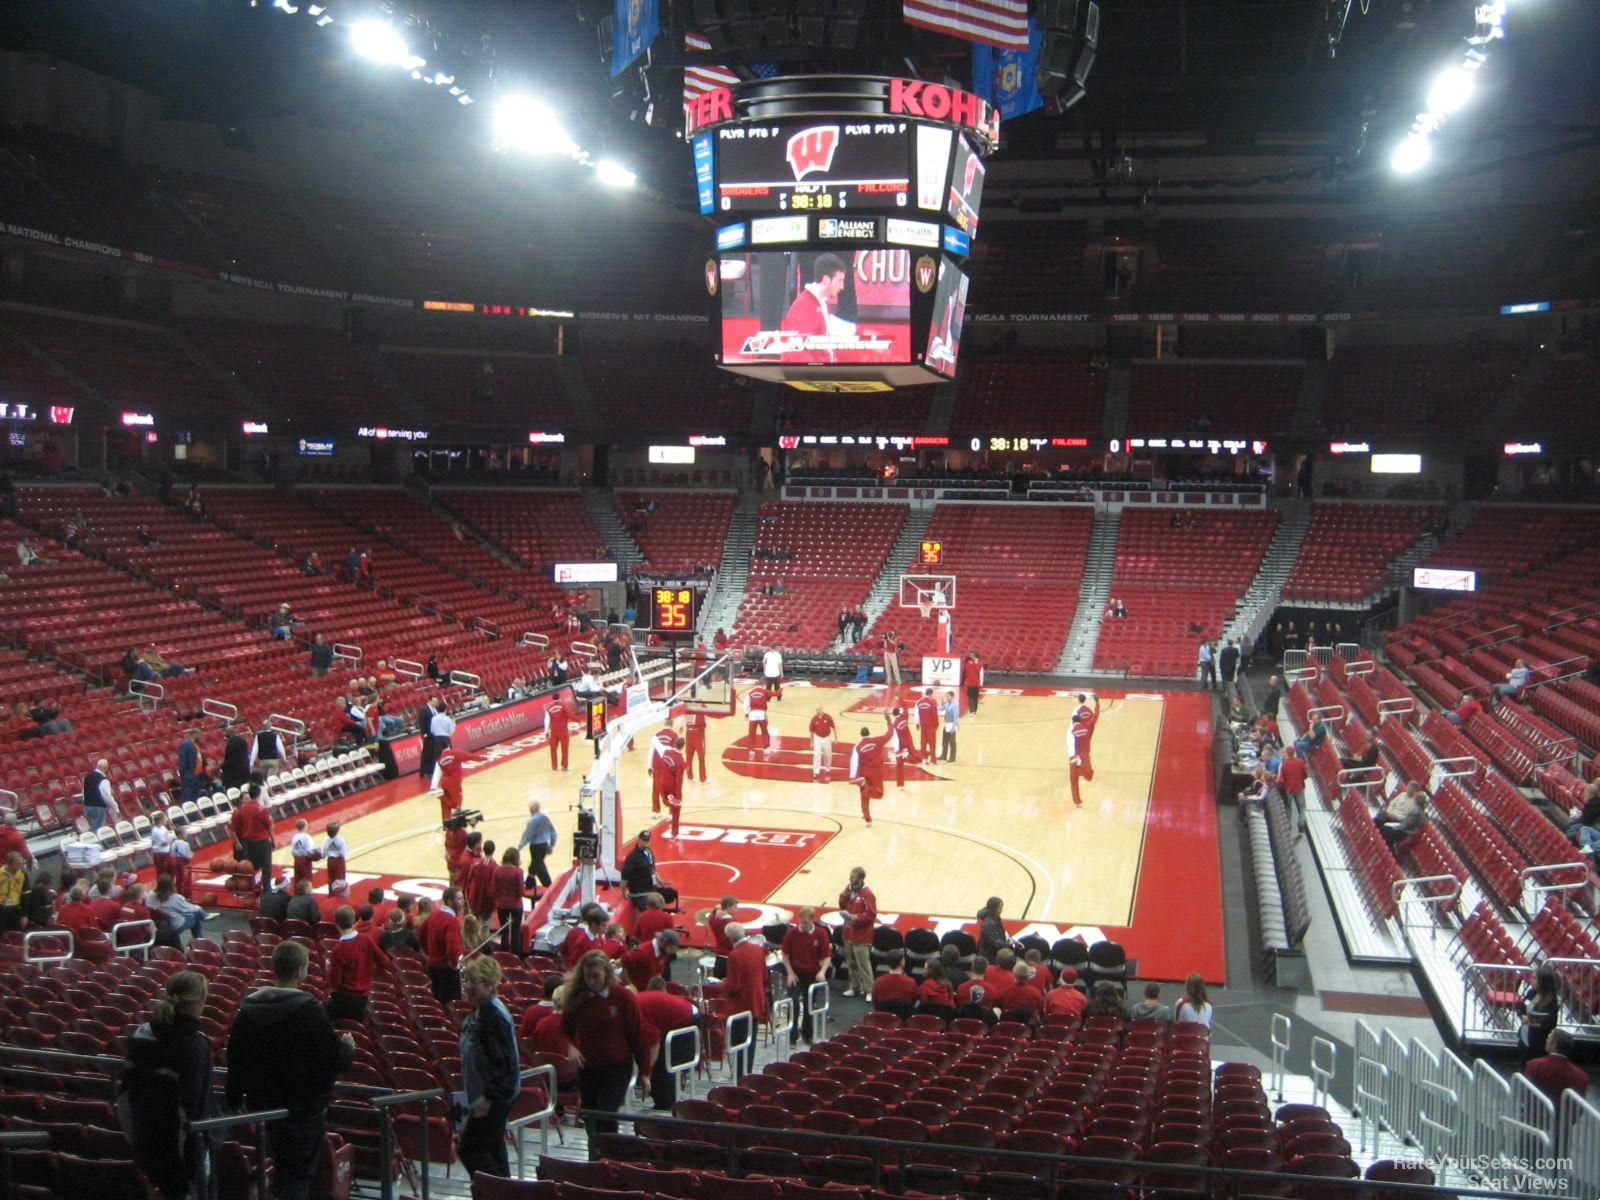 section 114 seat view  - kohl center